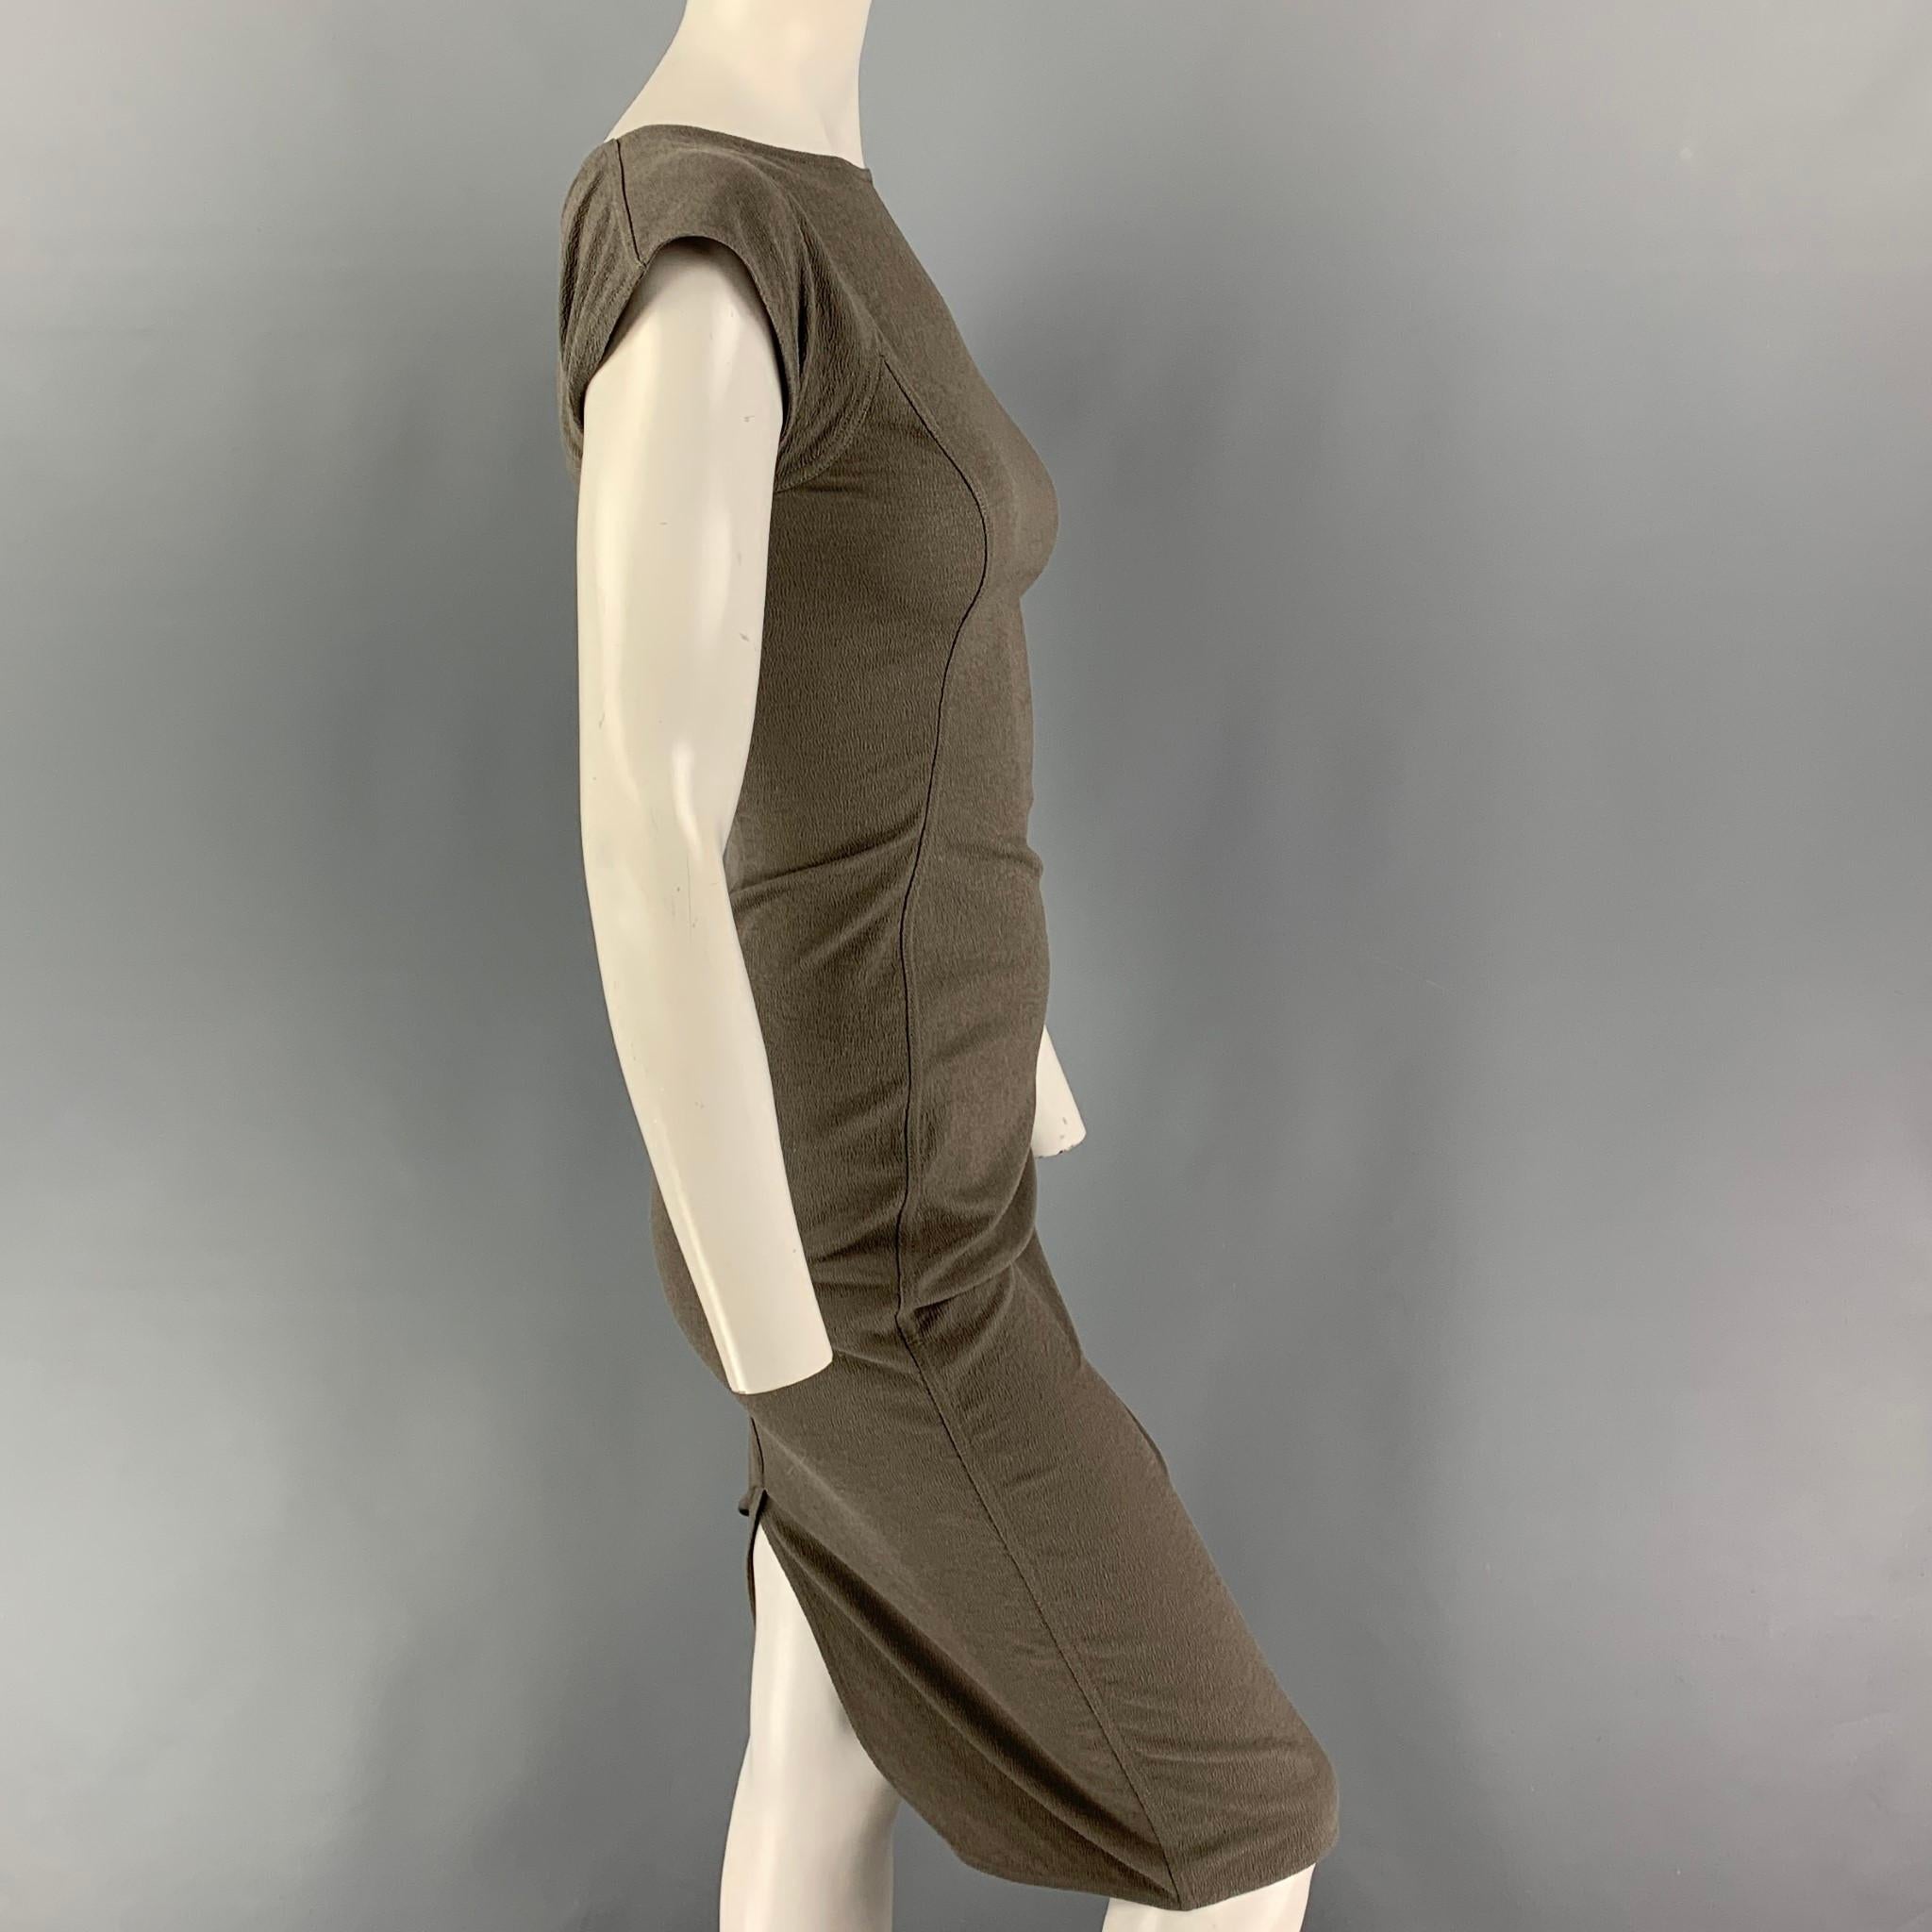 RICK OWENS GETHSEMANE FW 21 fitted dress comes in a moss textured cotton blend featuring cap sleeves, round neck, and a back zipper closure. Made in Italy. 

Very Good Pre-Owned Condition.
Marked: IT 38 / GB 6 / DE 34 / US